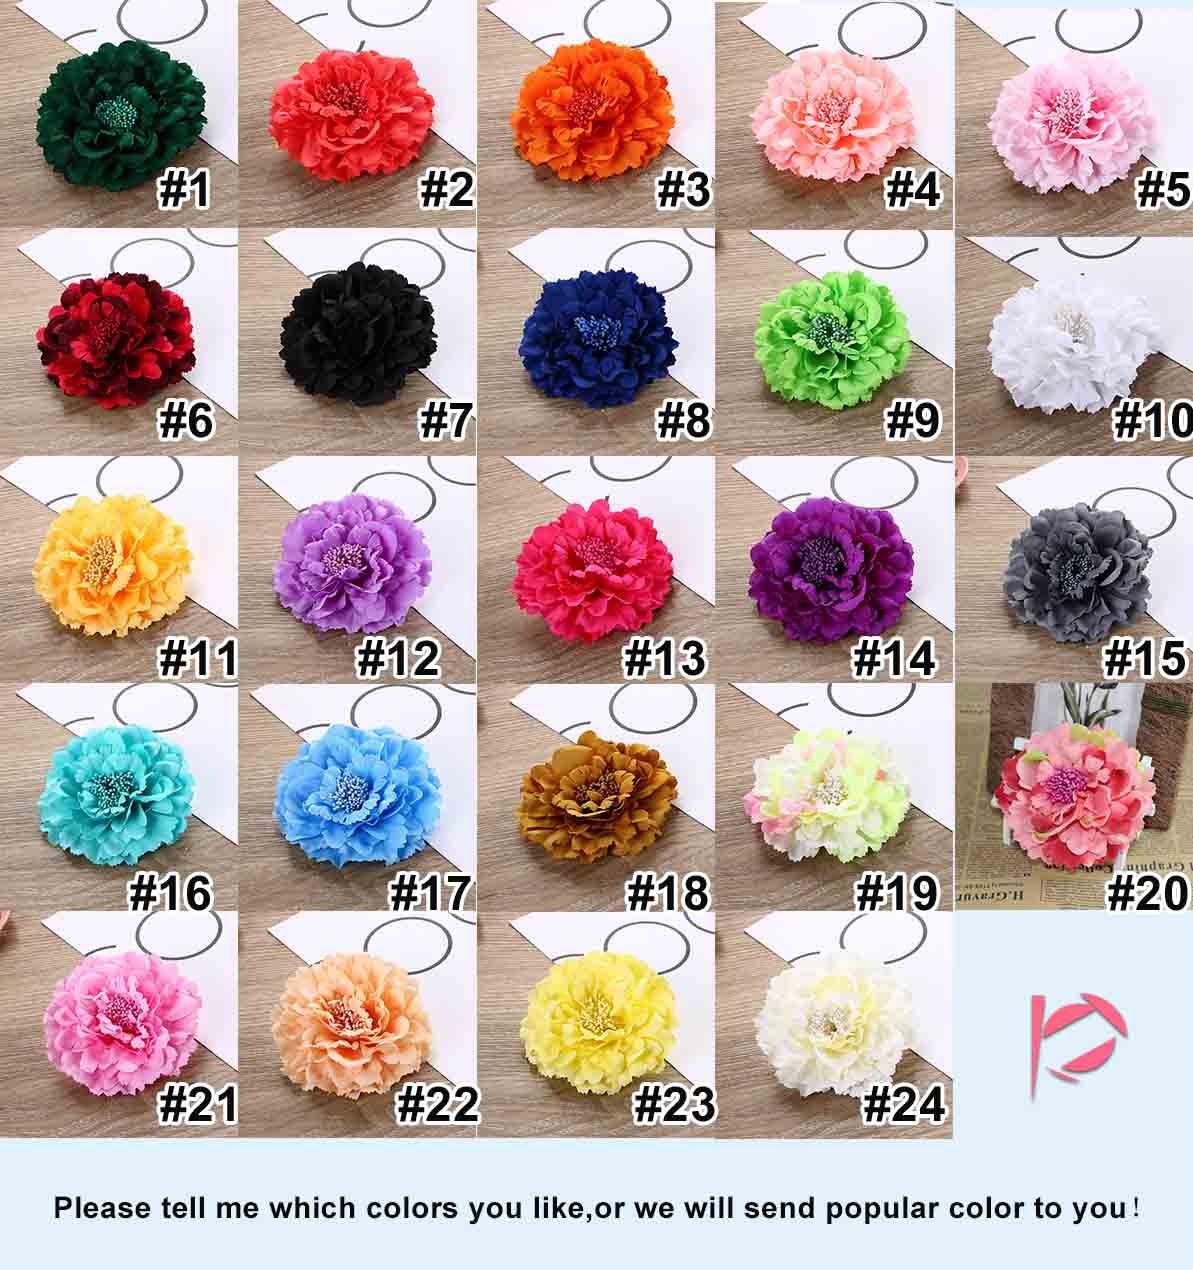 New Fashion Woman Lady Peony Flower Hair Clip Hairpin Brooch Accessories